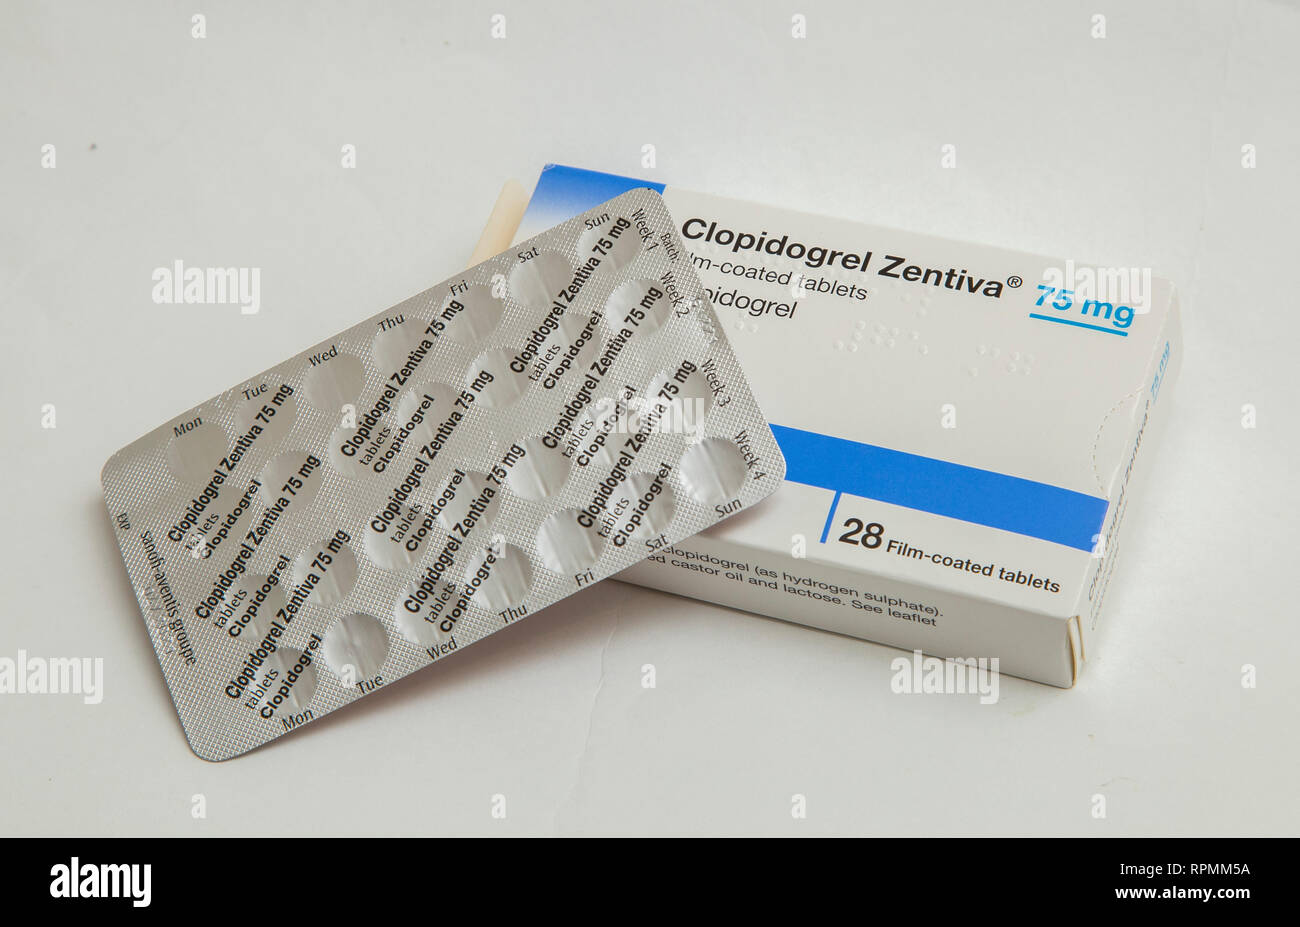 Clopidigrel, an antiplatelet drug typically taken to thin the blood and reduce the risk of a heart attack, heart failure or a stroke. Stock Photo